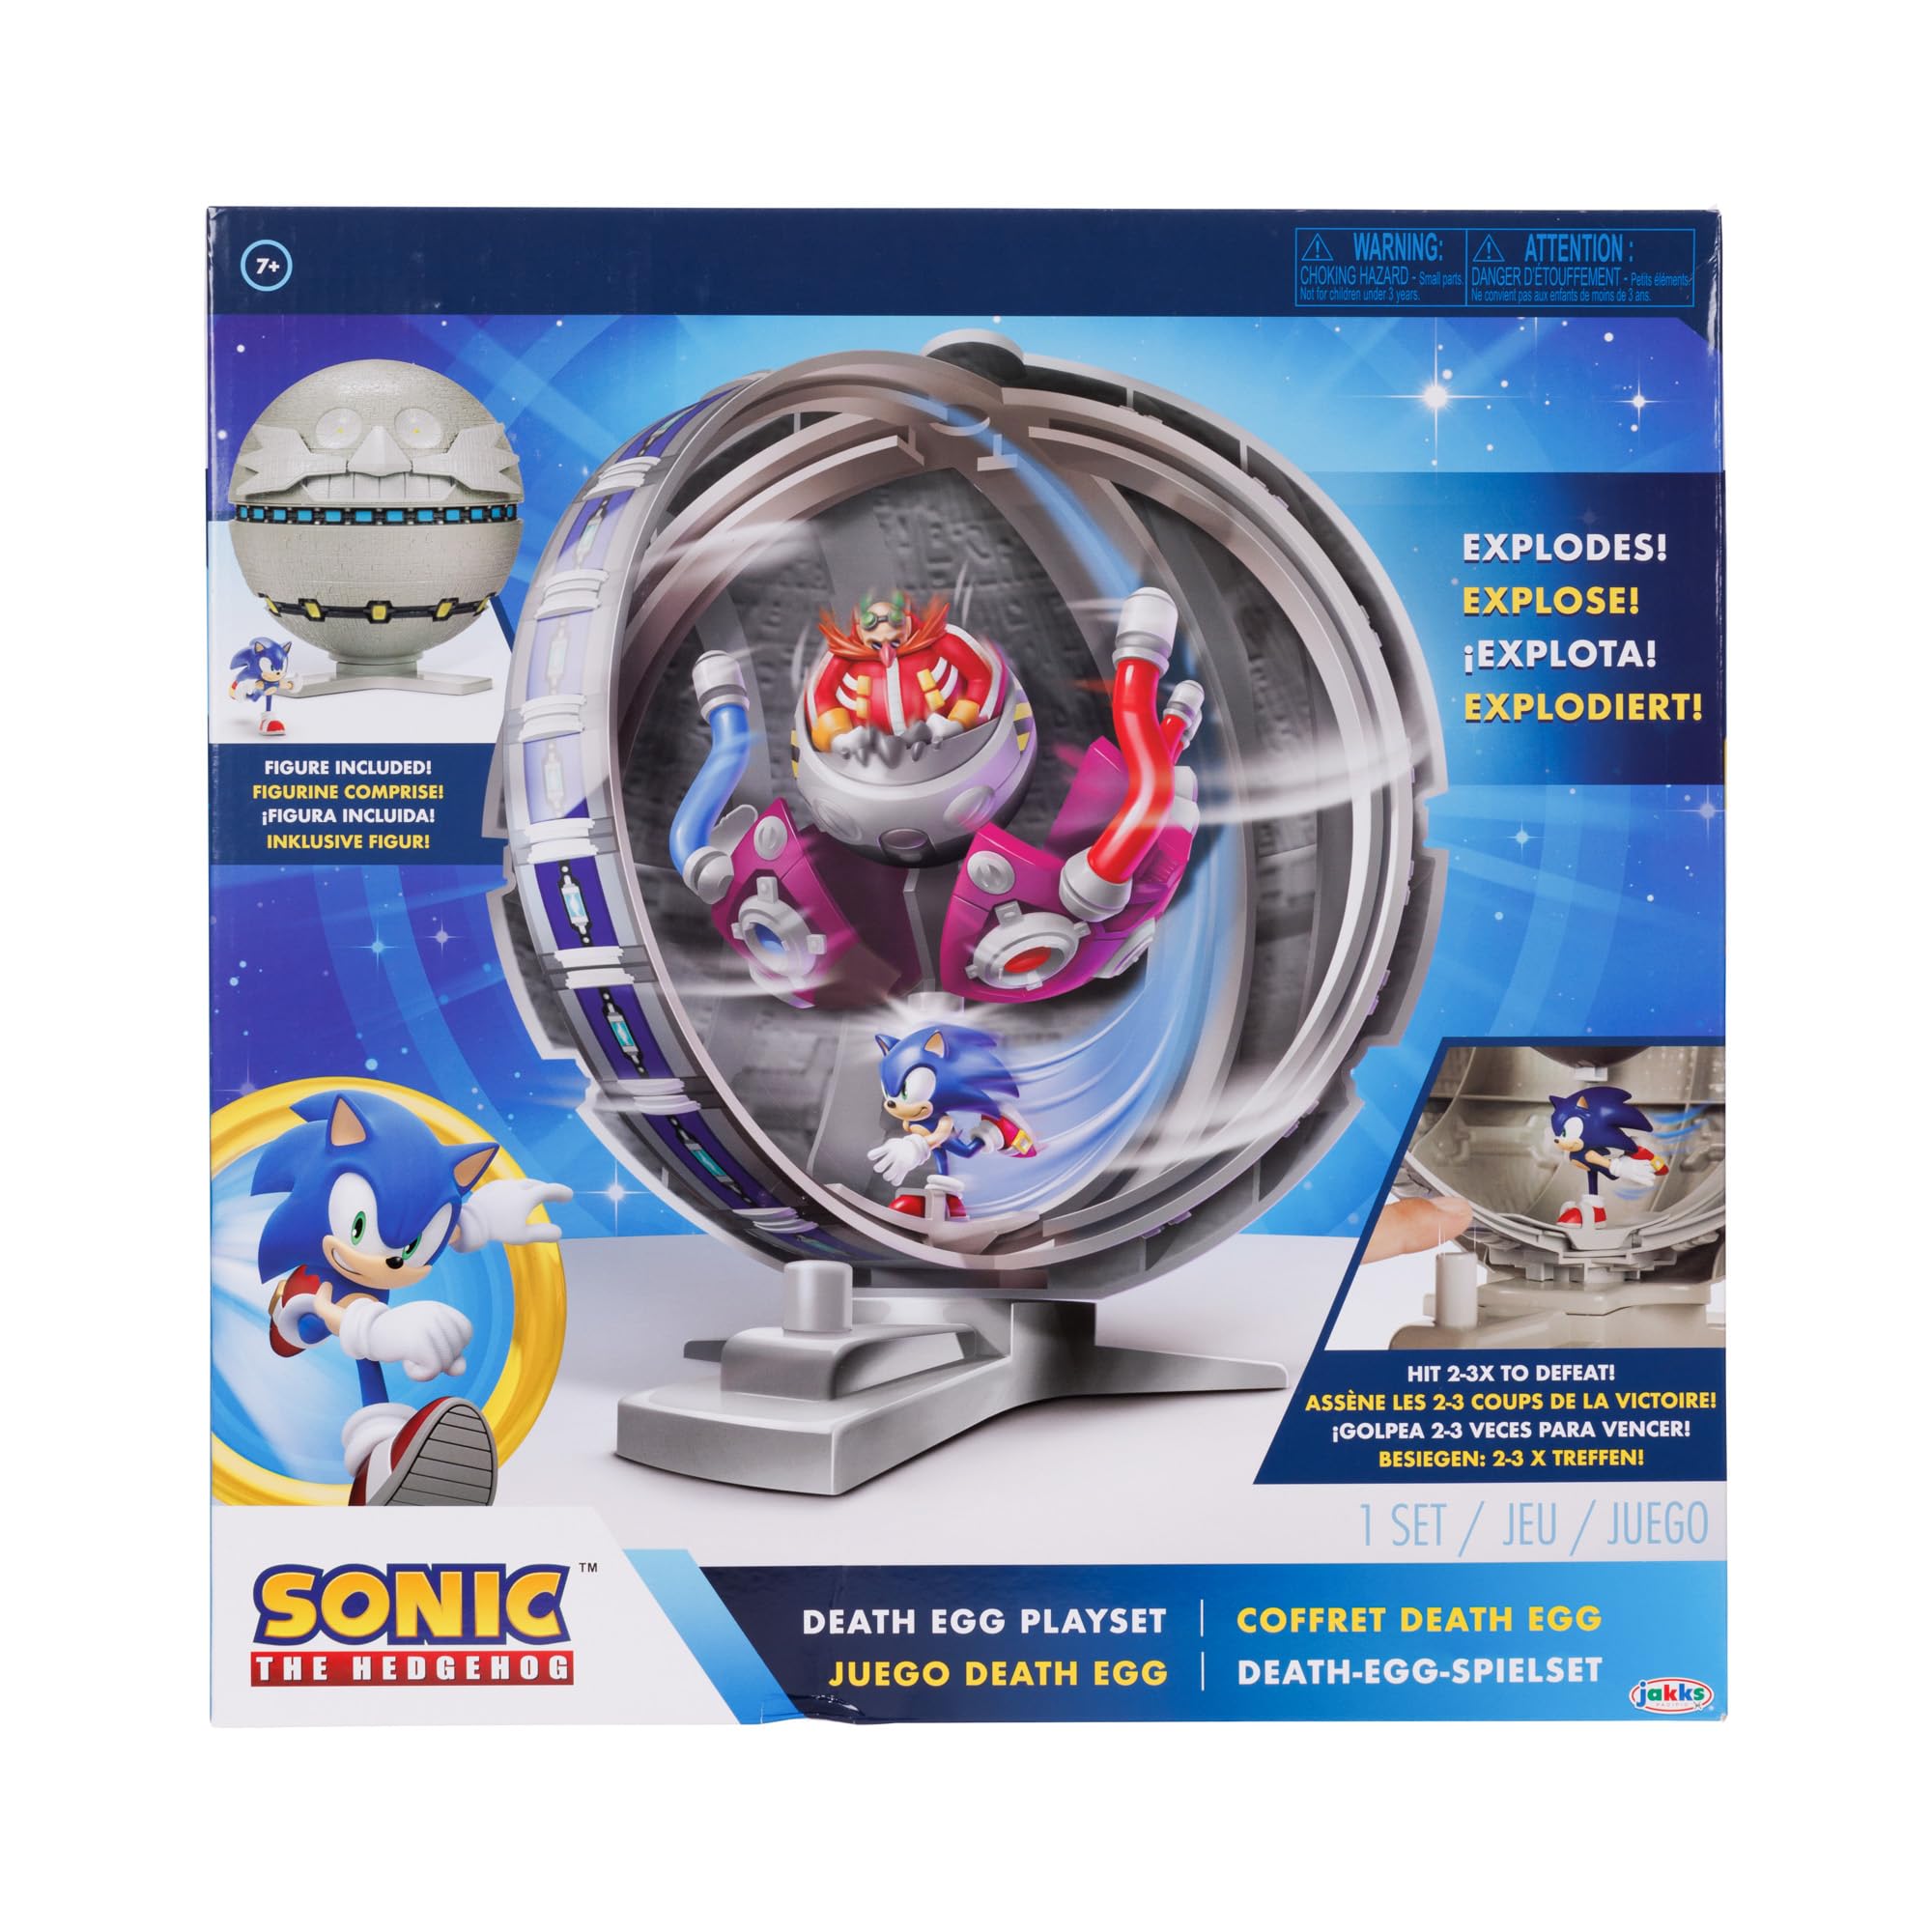 Sonic The Hedgehog 2.5" Action Figure Death Egg Playset with Sonic $11.98 + Free Shipping w/ Prime or on $35+